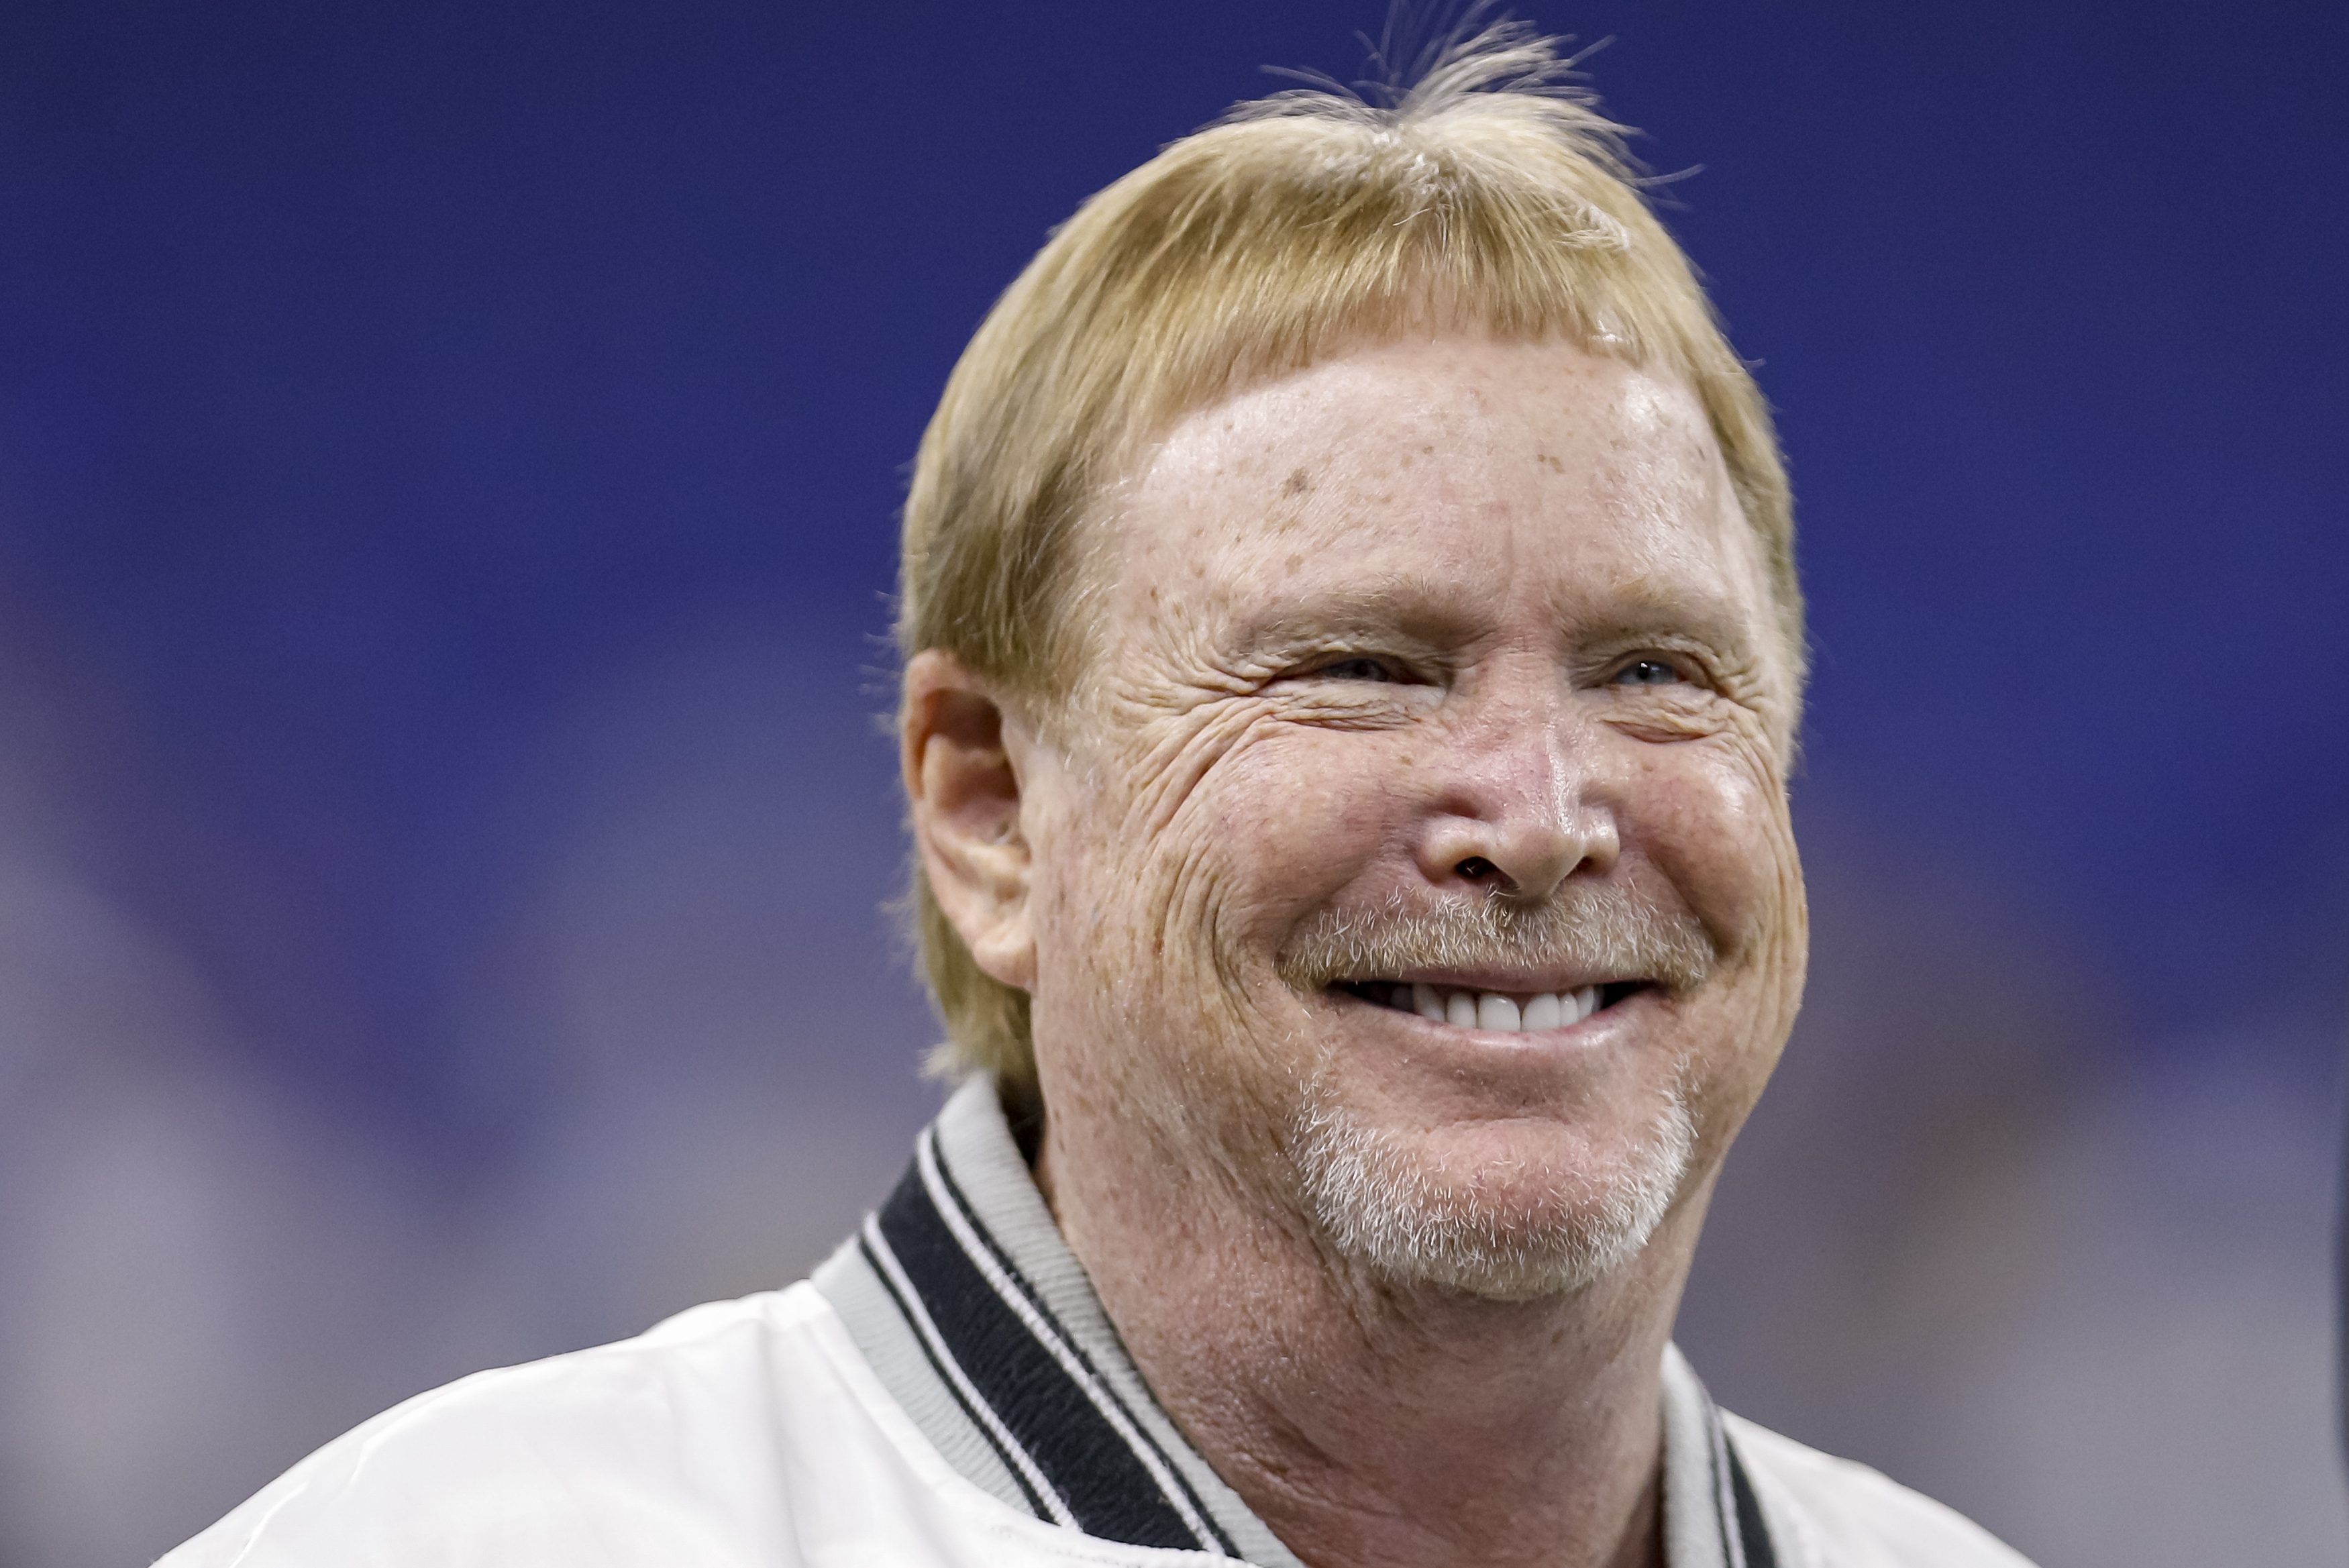 Las Vegas Raiders owner Mark Davis before a game against the Colts. The NFL owner is building a mansion that resembles the Raiders stadium in Las Vegas.